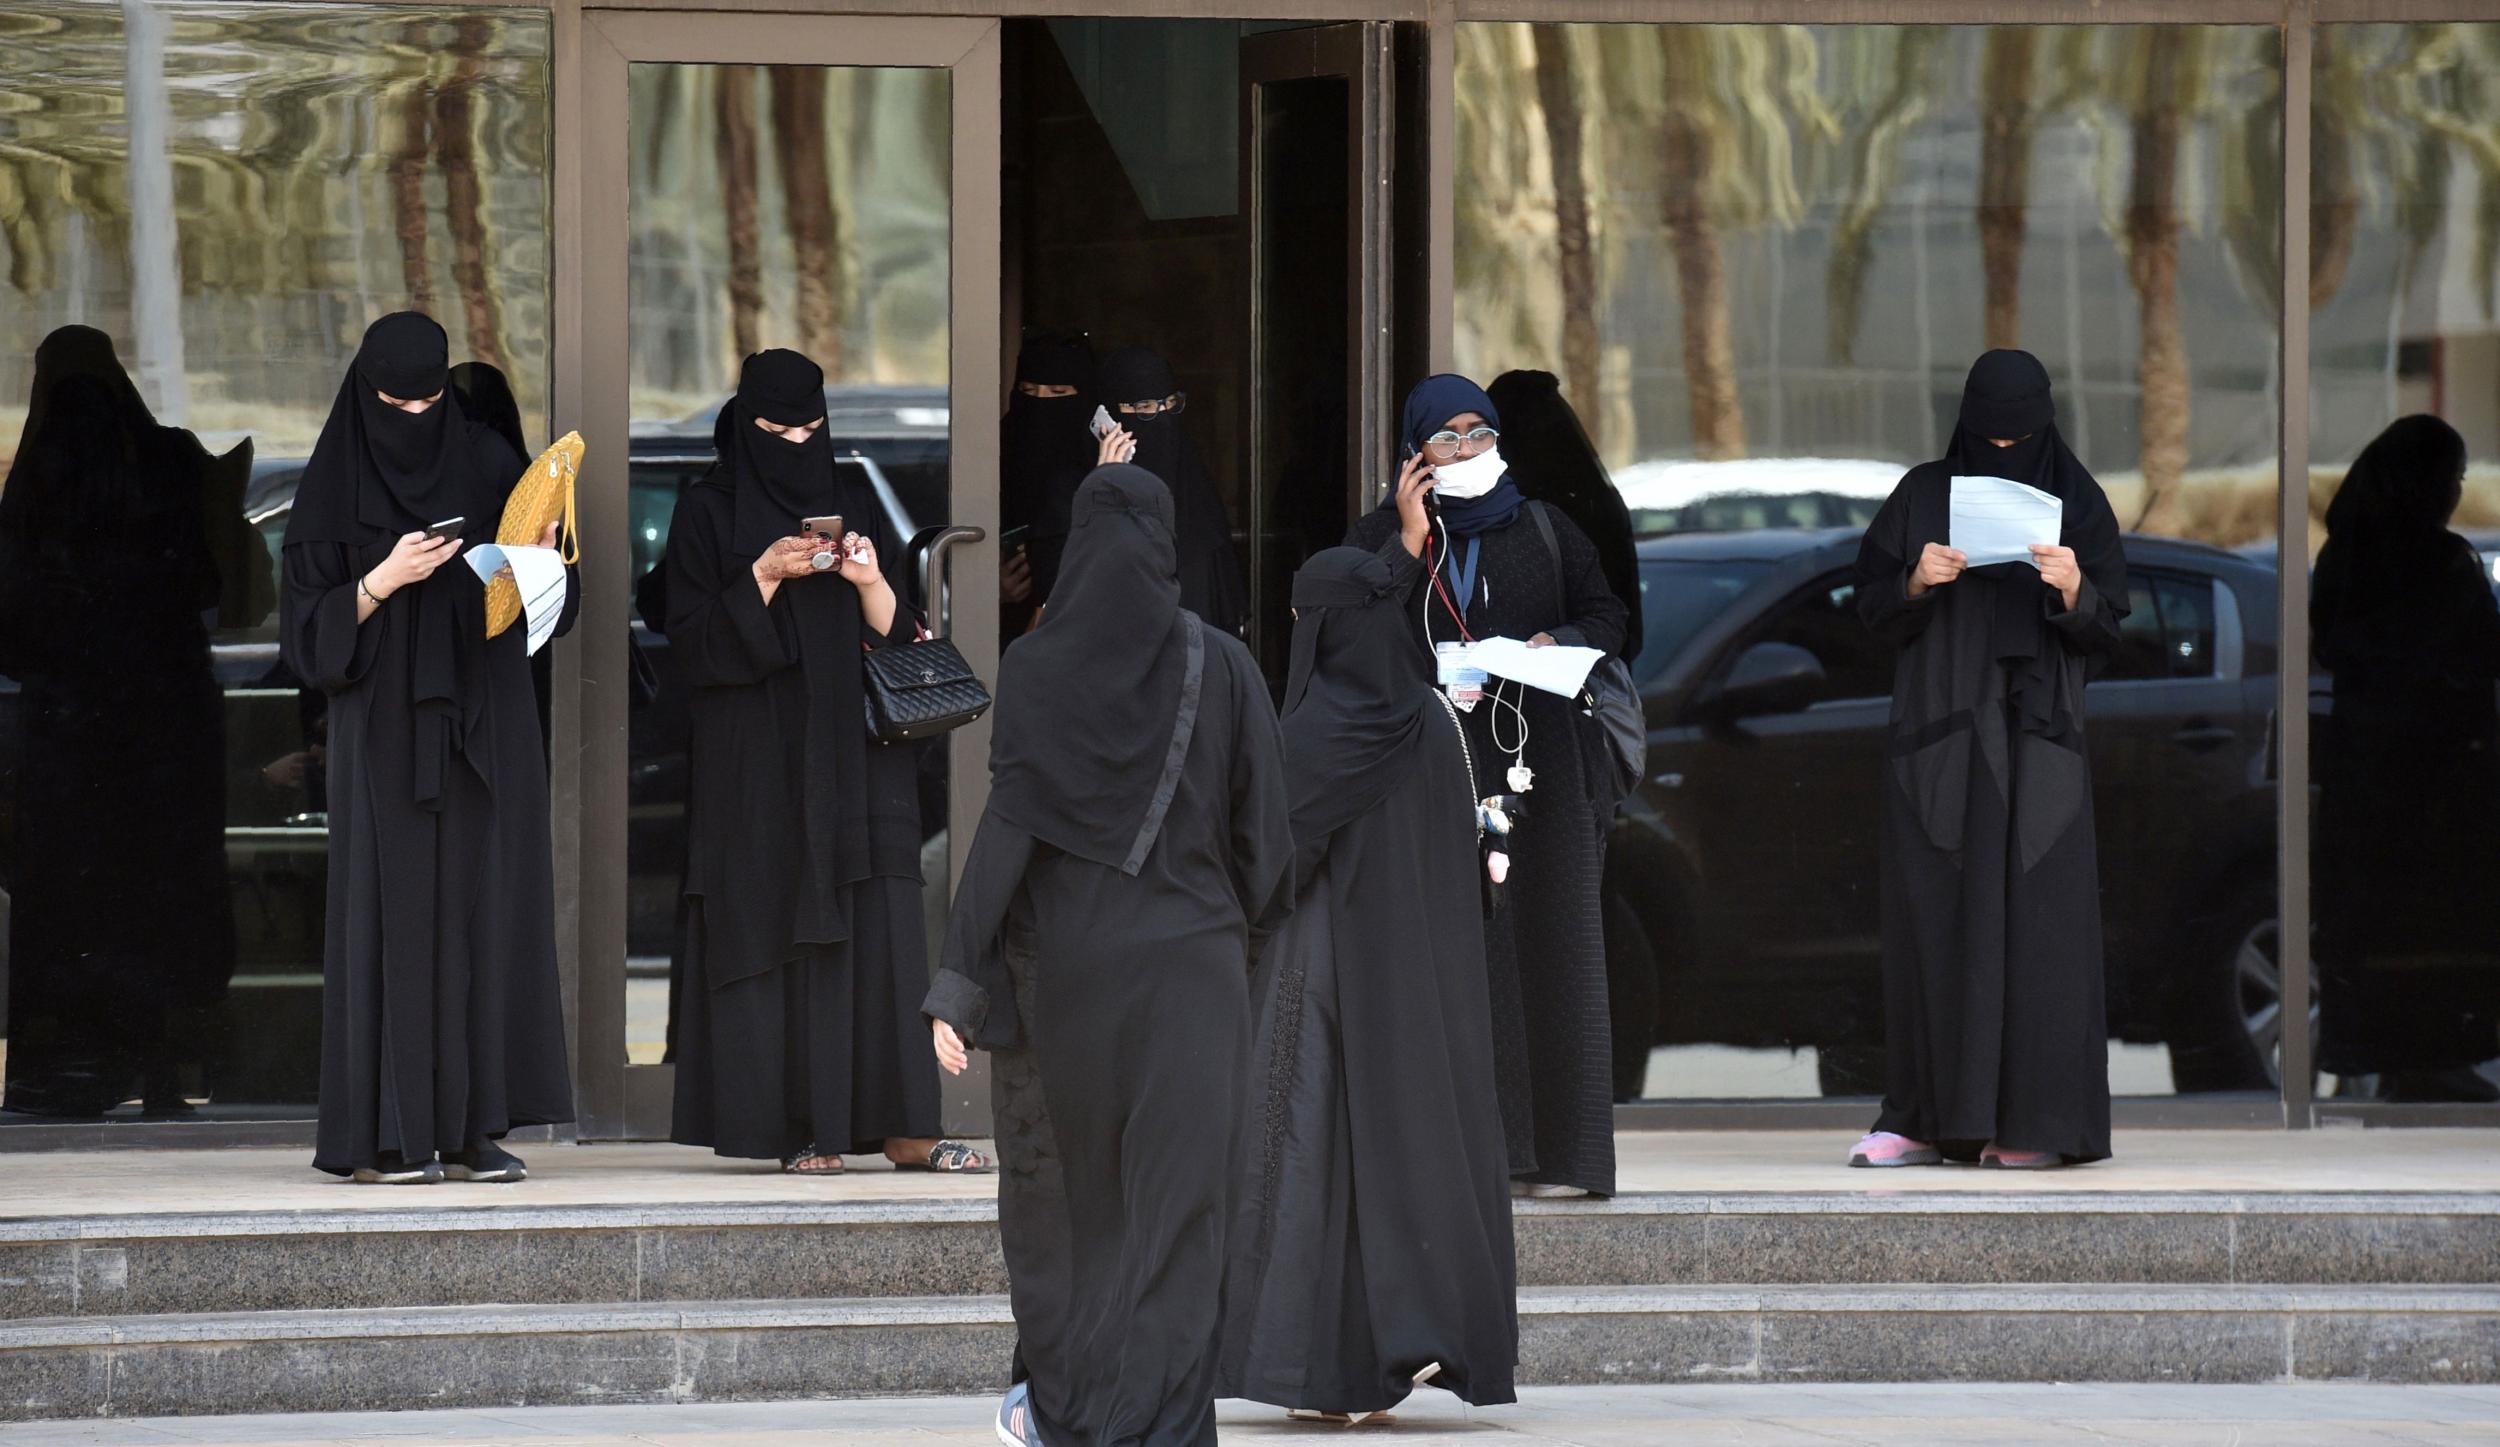 Women in Saudi Arabia are expected to wear loose fitting clothing, such as abayas, in public